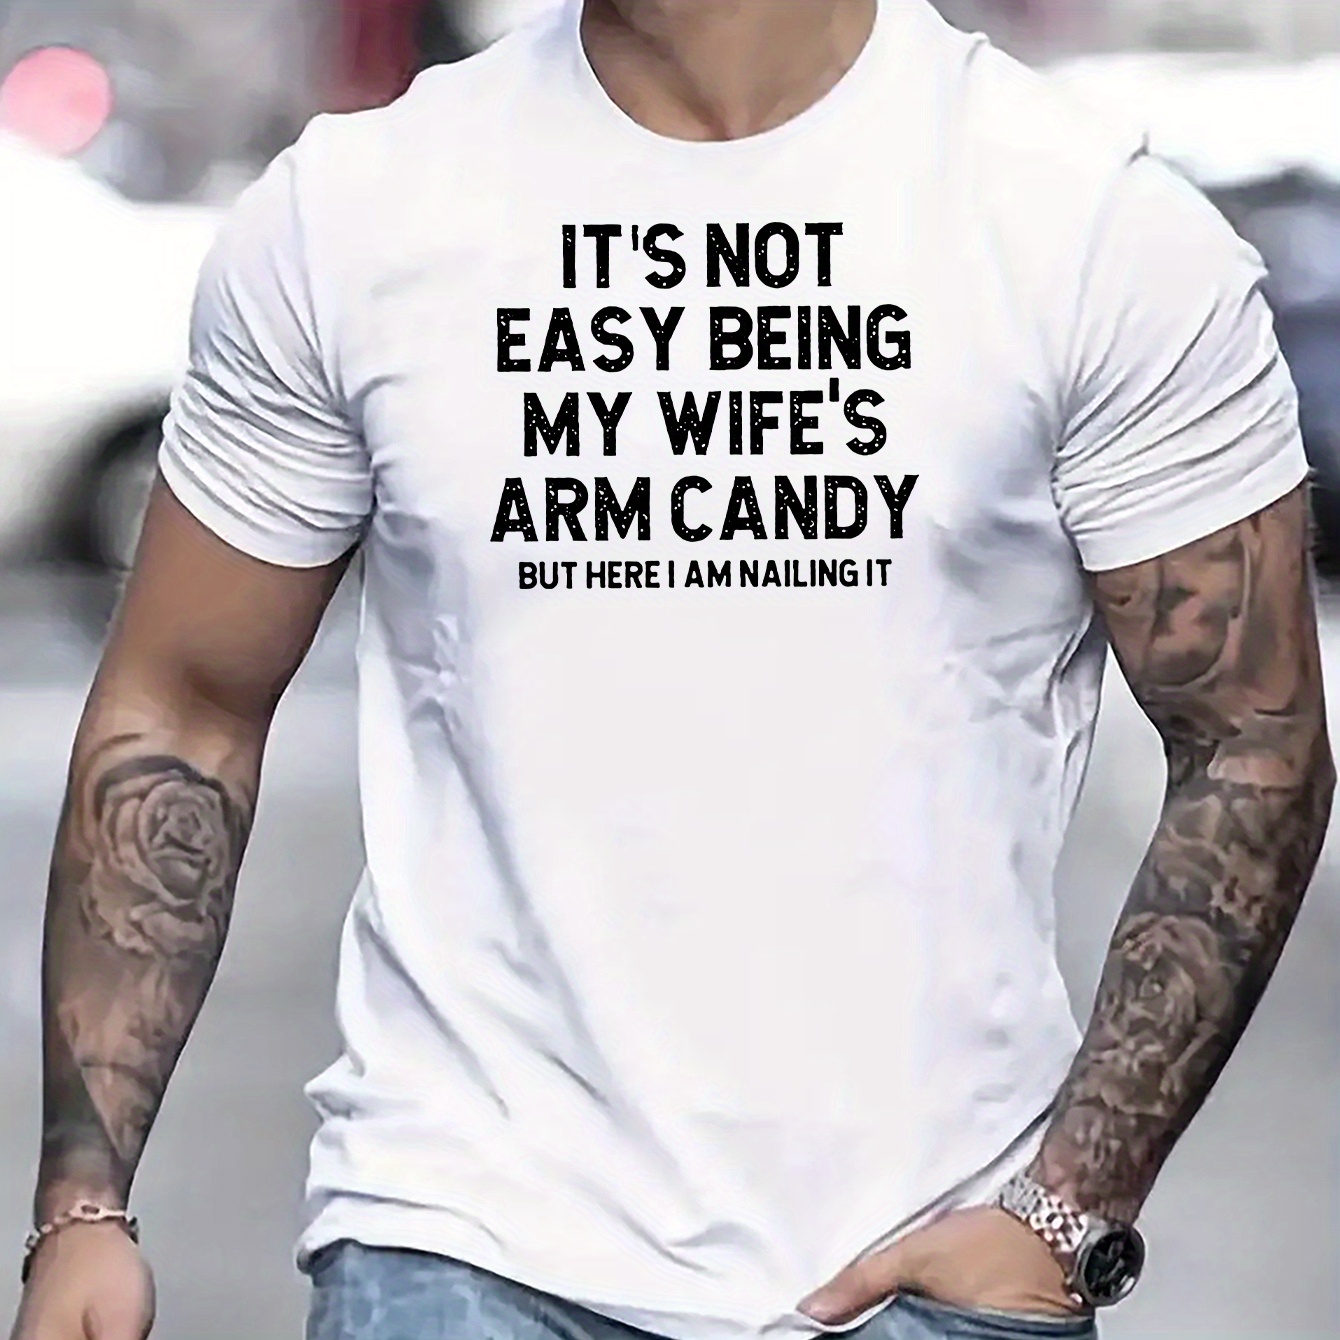 

It's Not Easy Being My Wife's Arm Candy Print T Shirt, Tees For Men, Casual Short Sleeve T-shirt For Summer